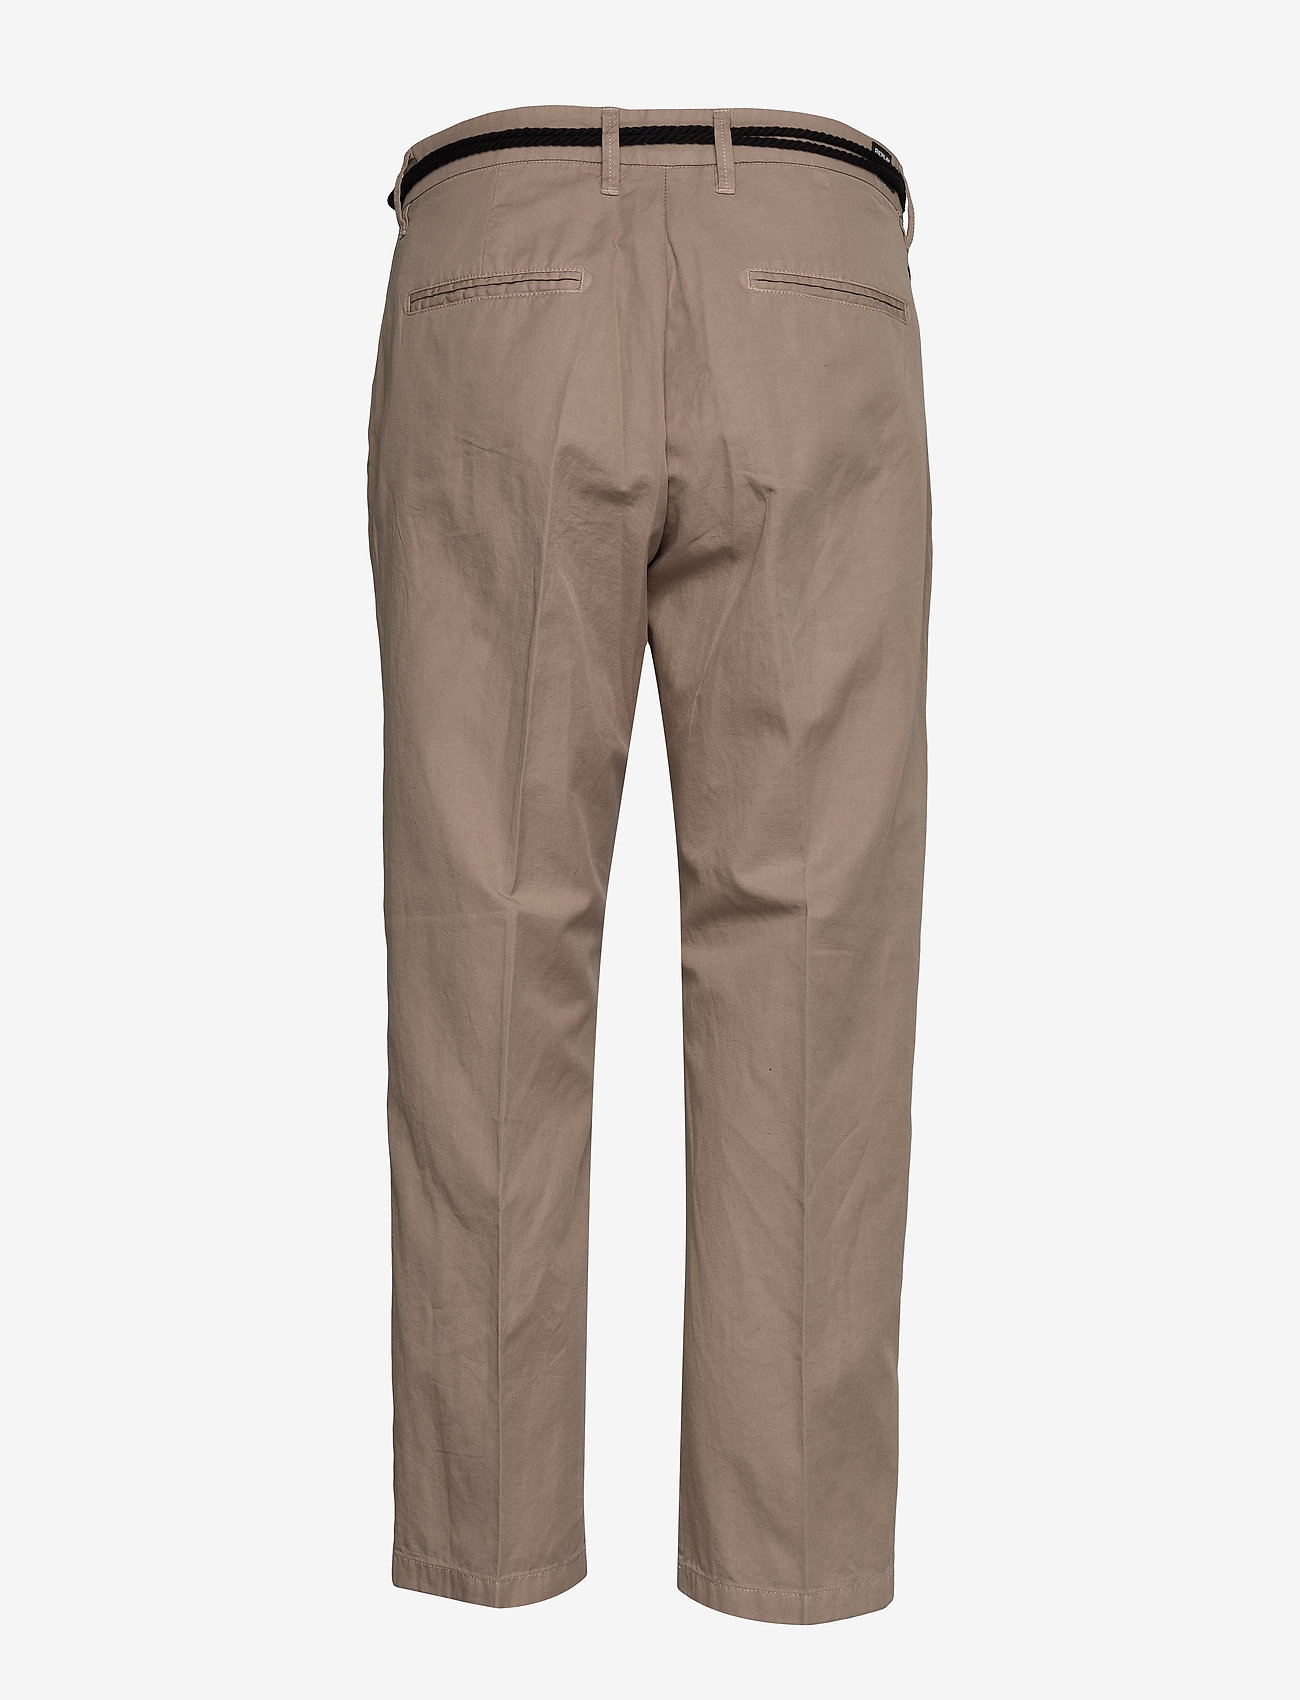 Replay - Trousers - straight leg trousers - beige - 1